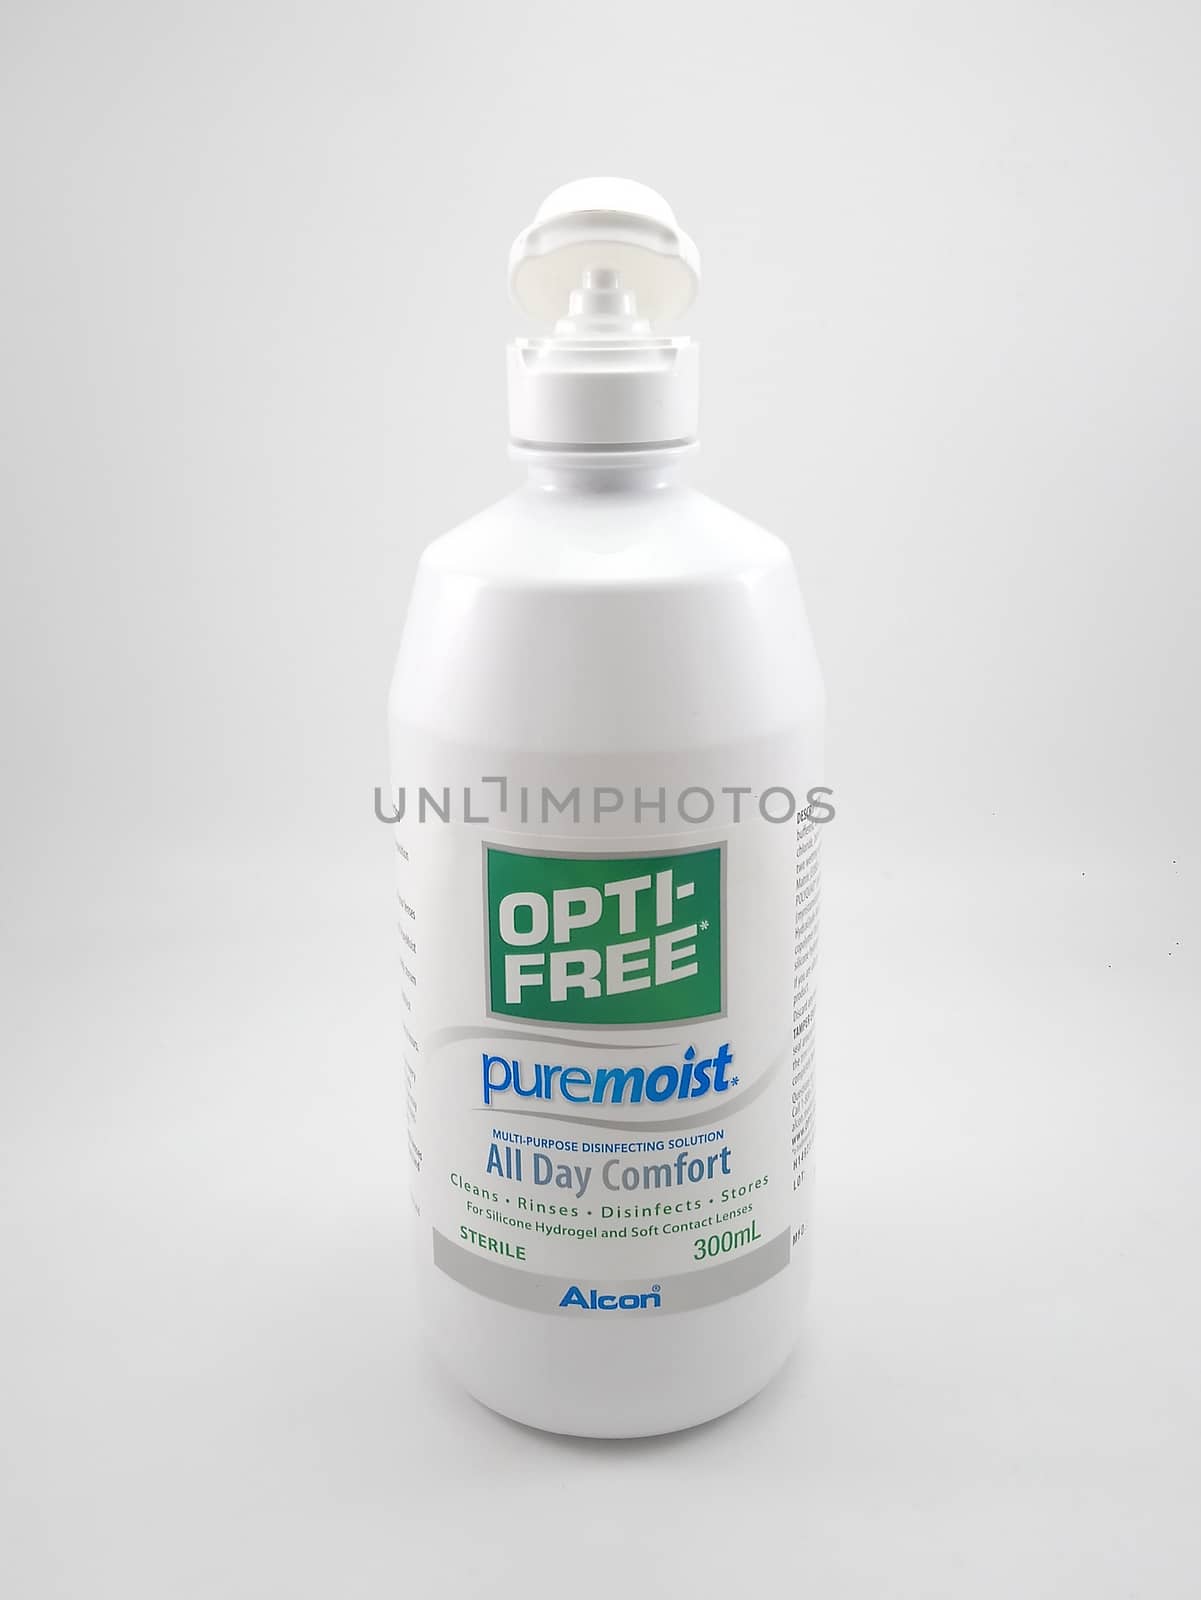 Optifree pure moist multi purpose disinfecting solution for cont by imwaltersy